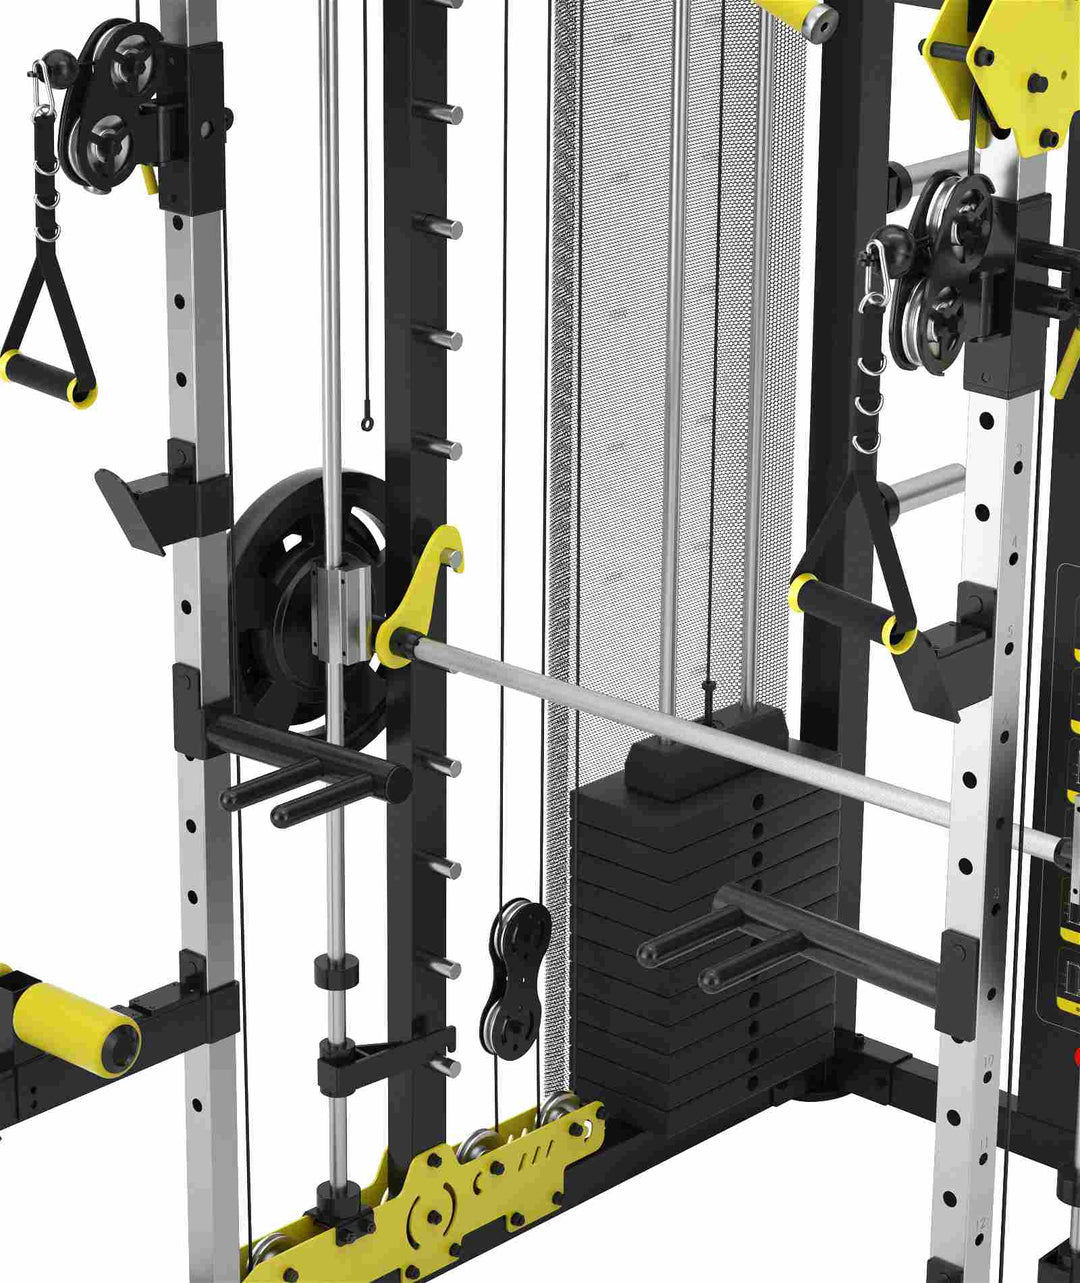 Snode Smith Machine All-In-One Functional Trainer Home Gym